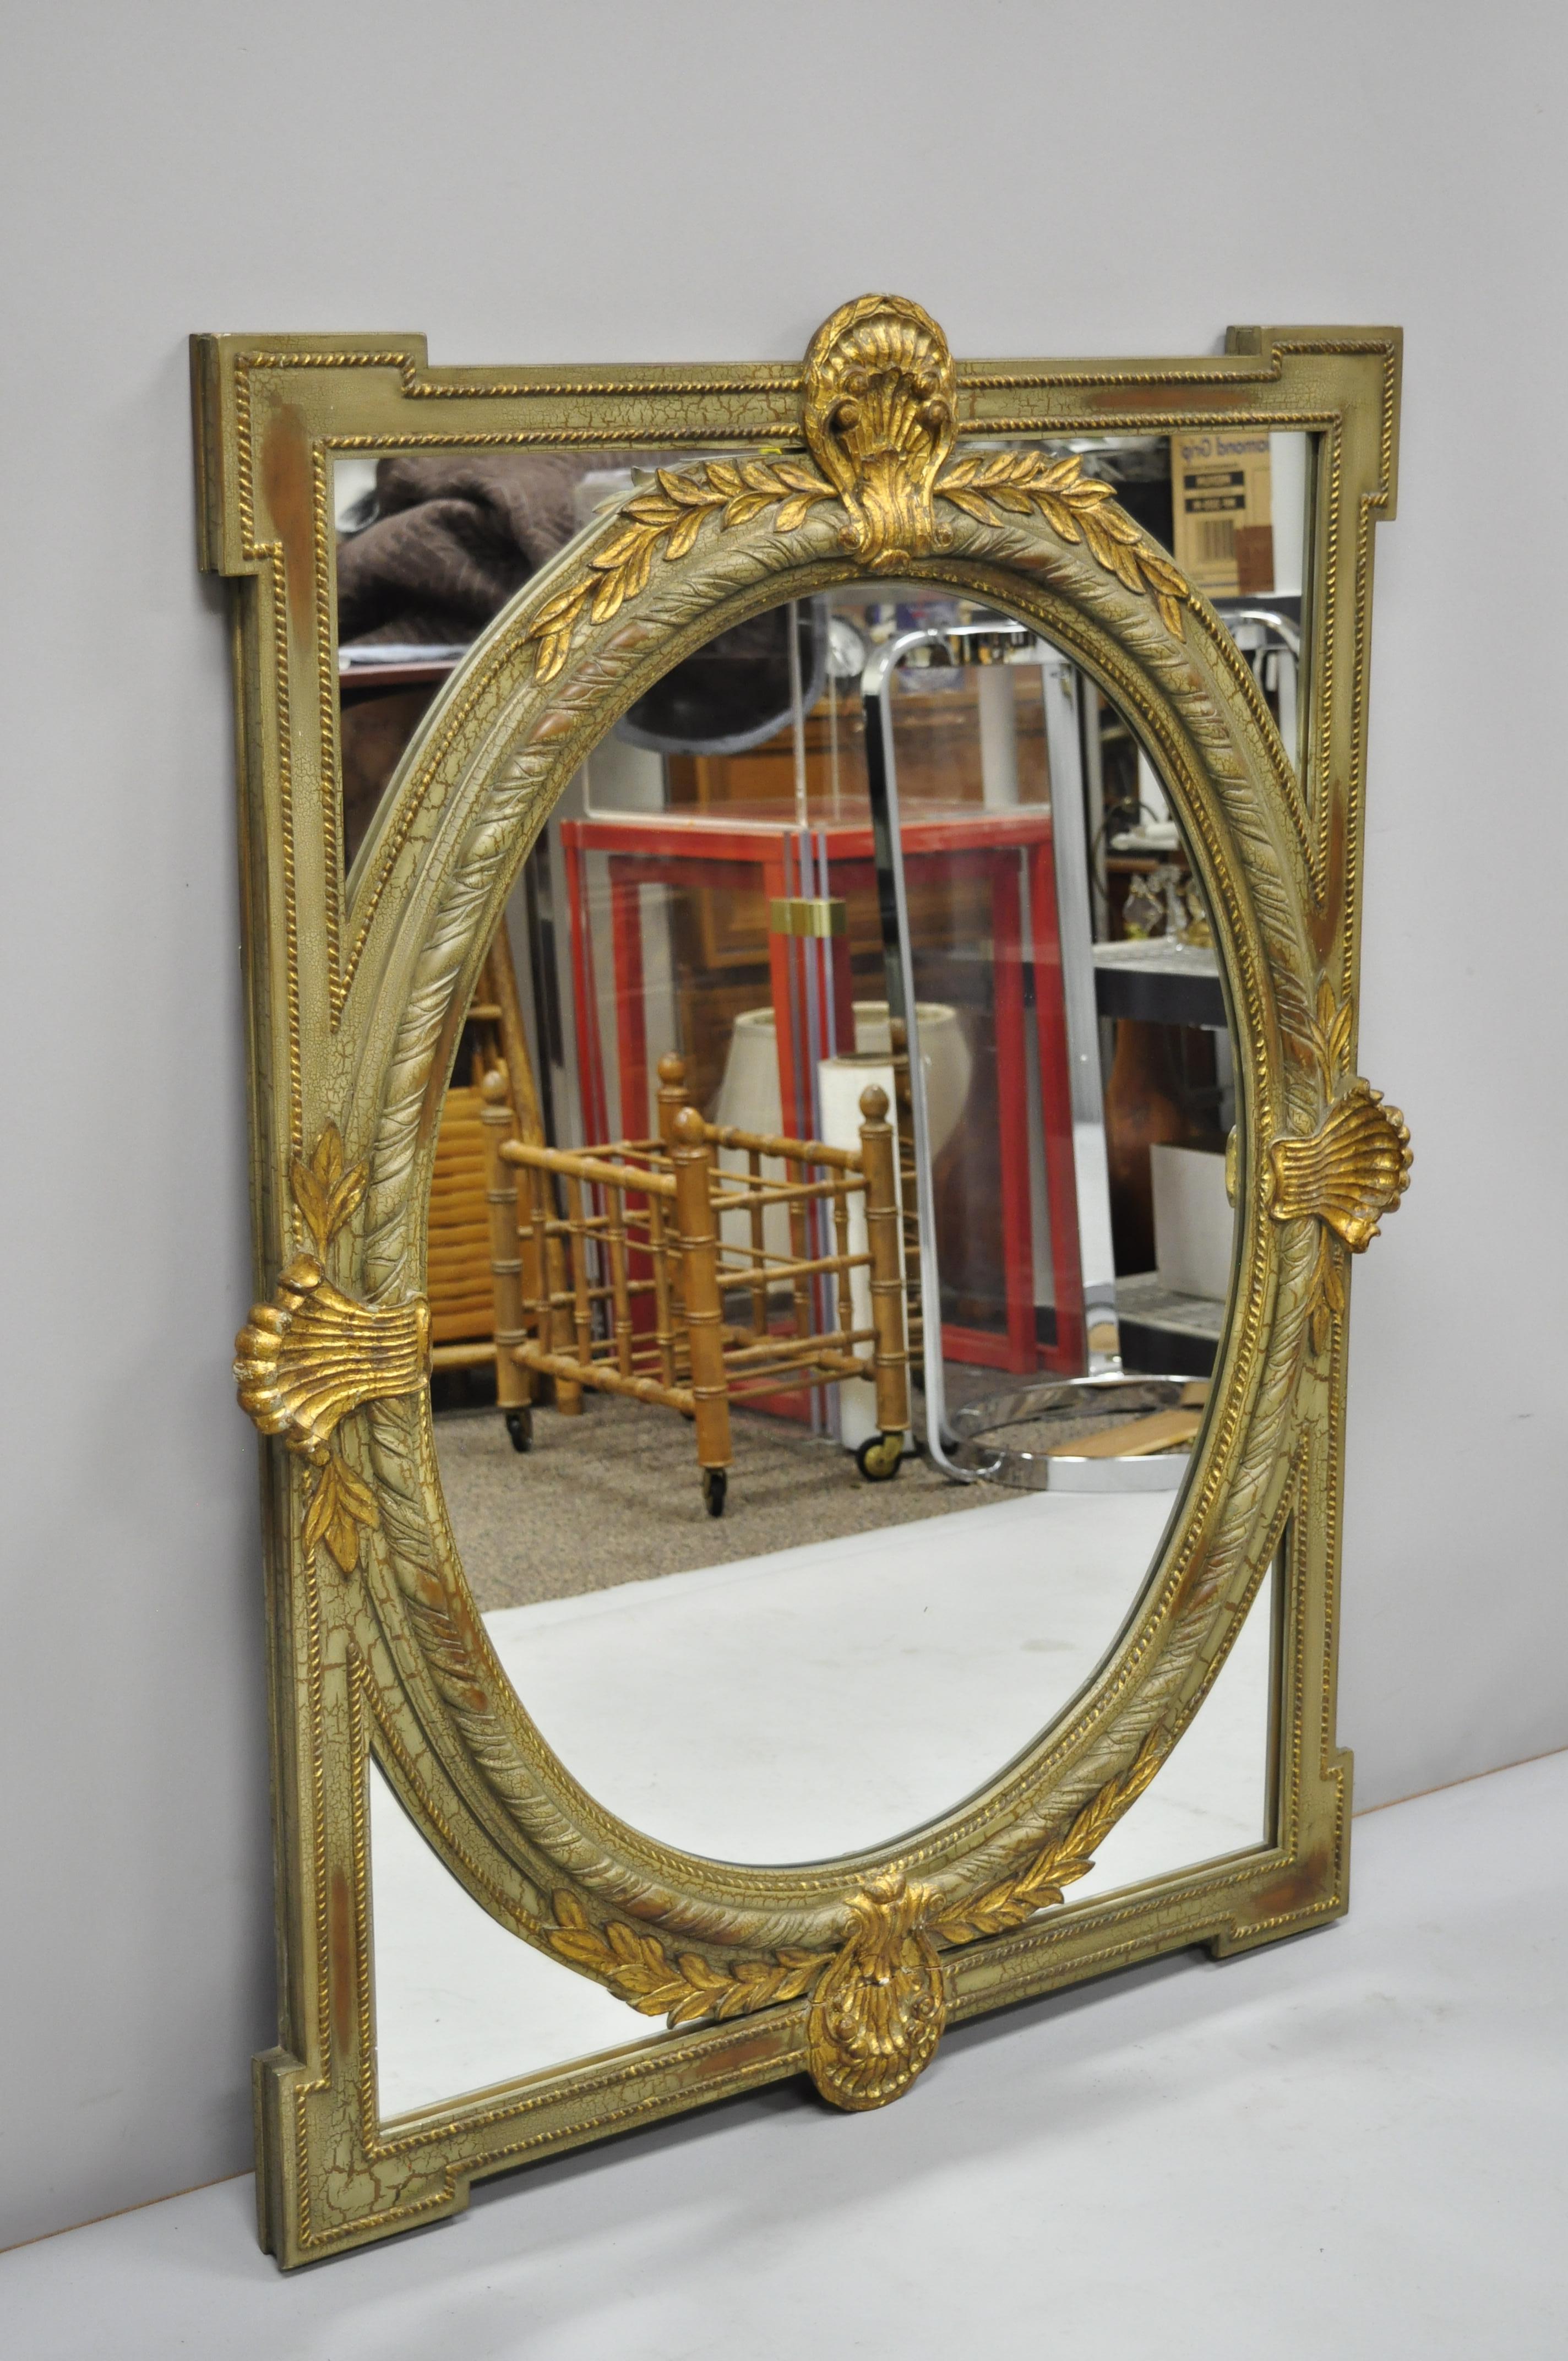 Drexel heritage European legacy green and gold distress painted mirror (213-210). Item features aolid wood frame, distressed finish, nicely carved details, original label, serial number 213-210-6, quality craftsmanship, great style and form, circa